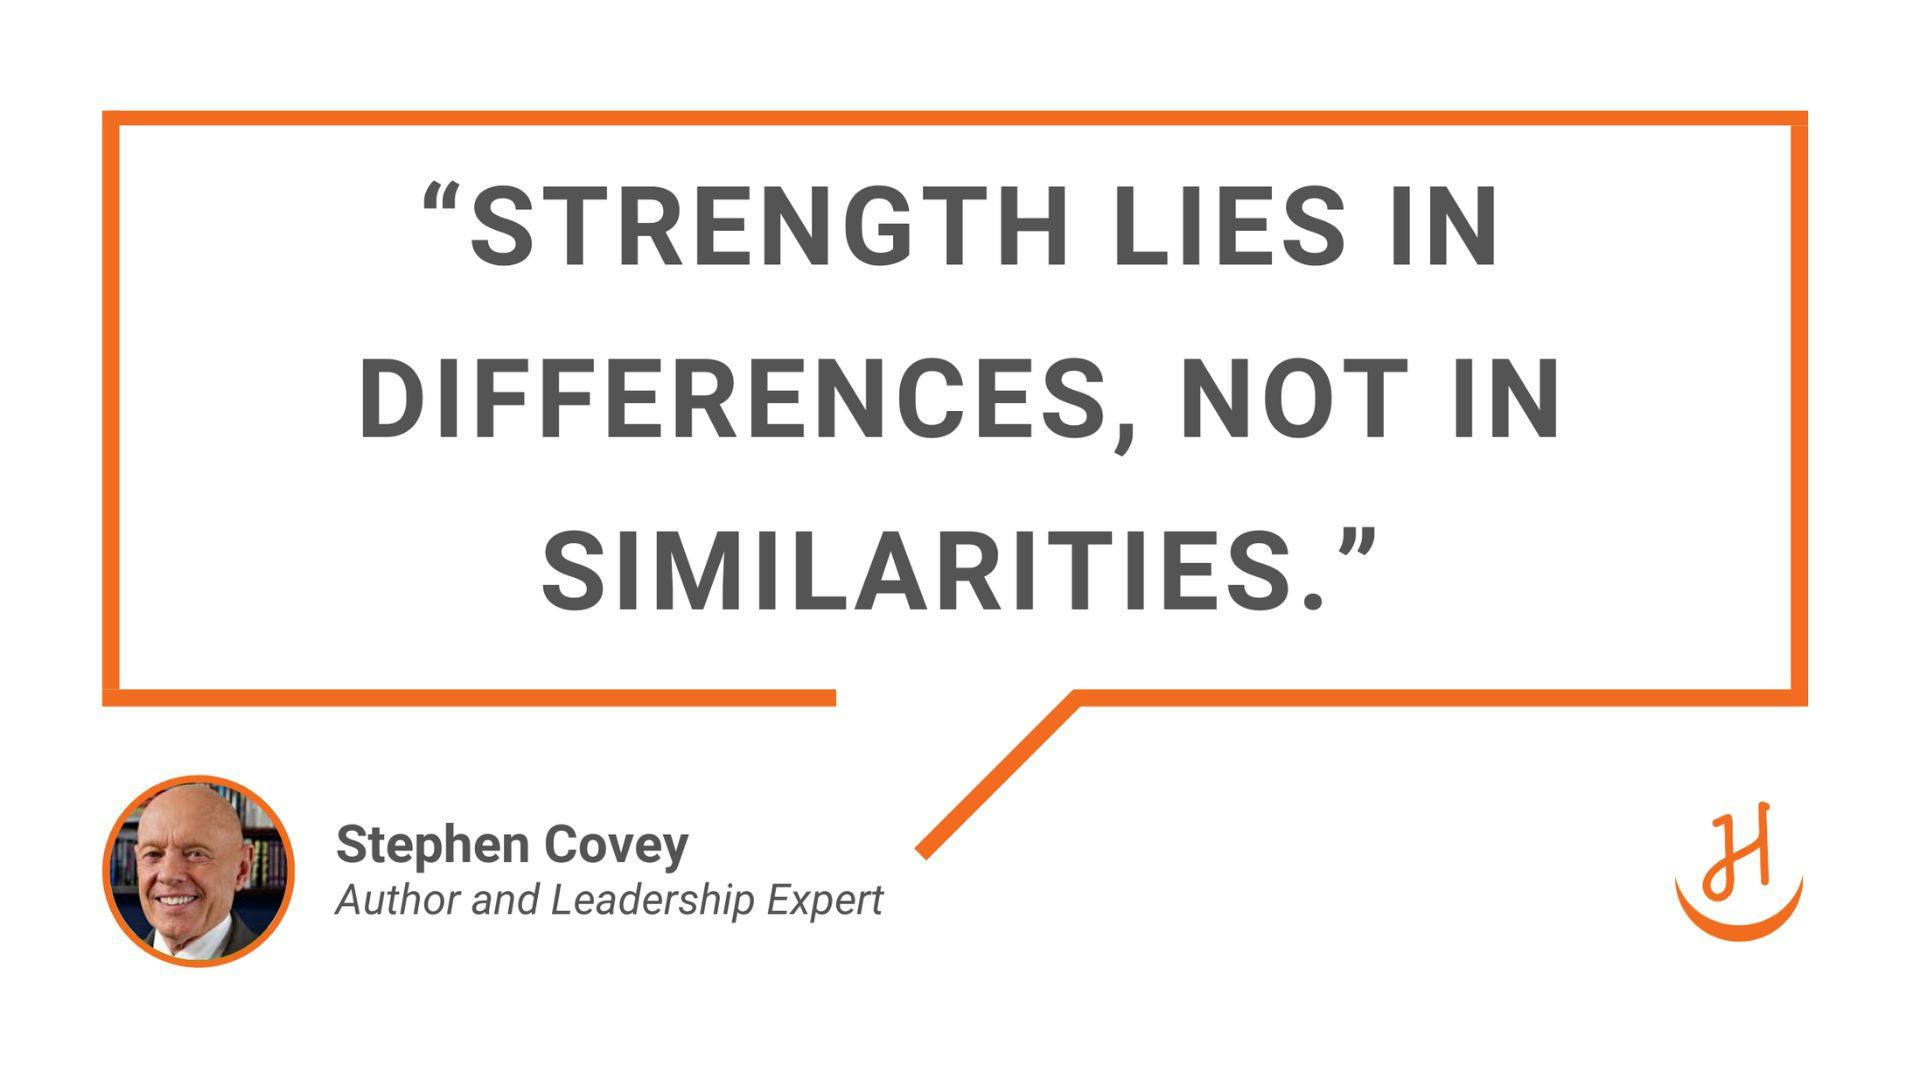 "Strength lies in differences, not in similarities." Stephen Covey, Author and Leadership Expert